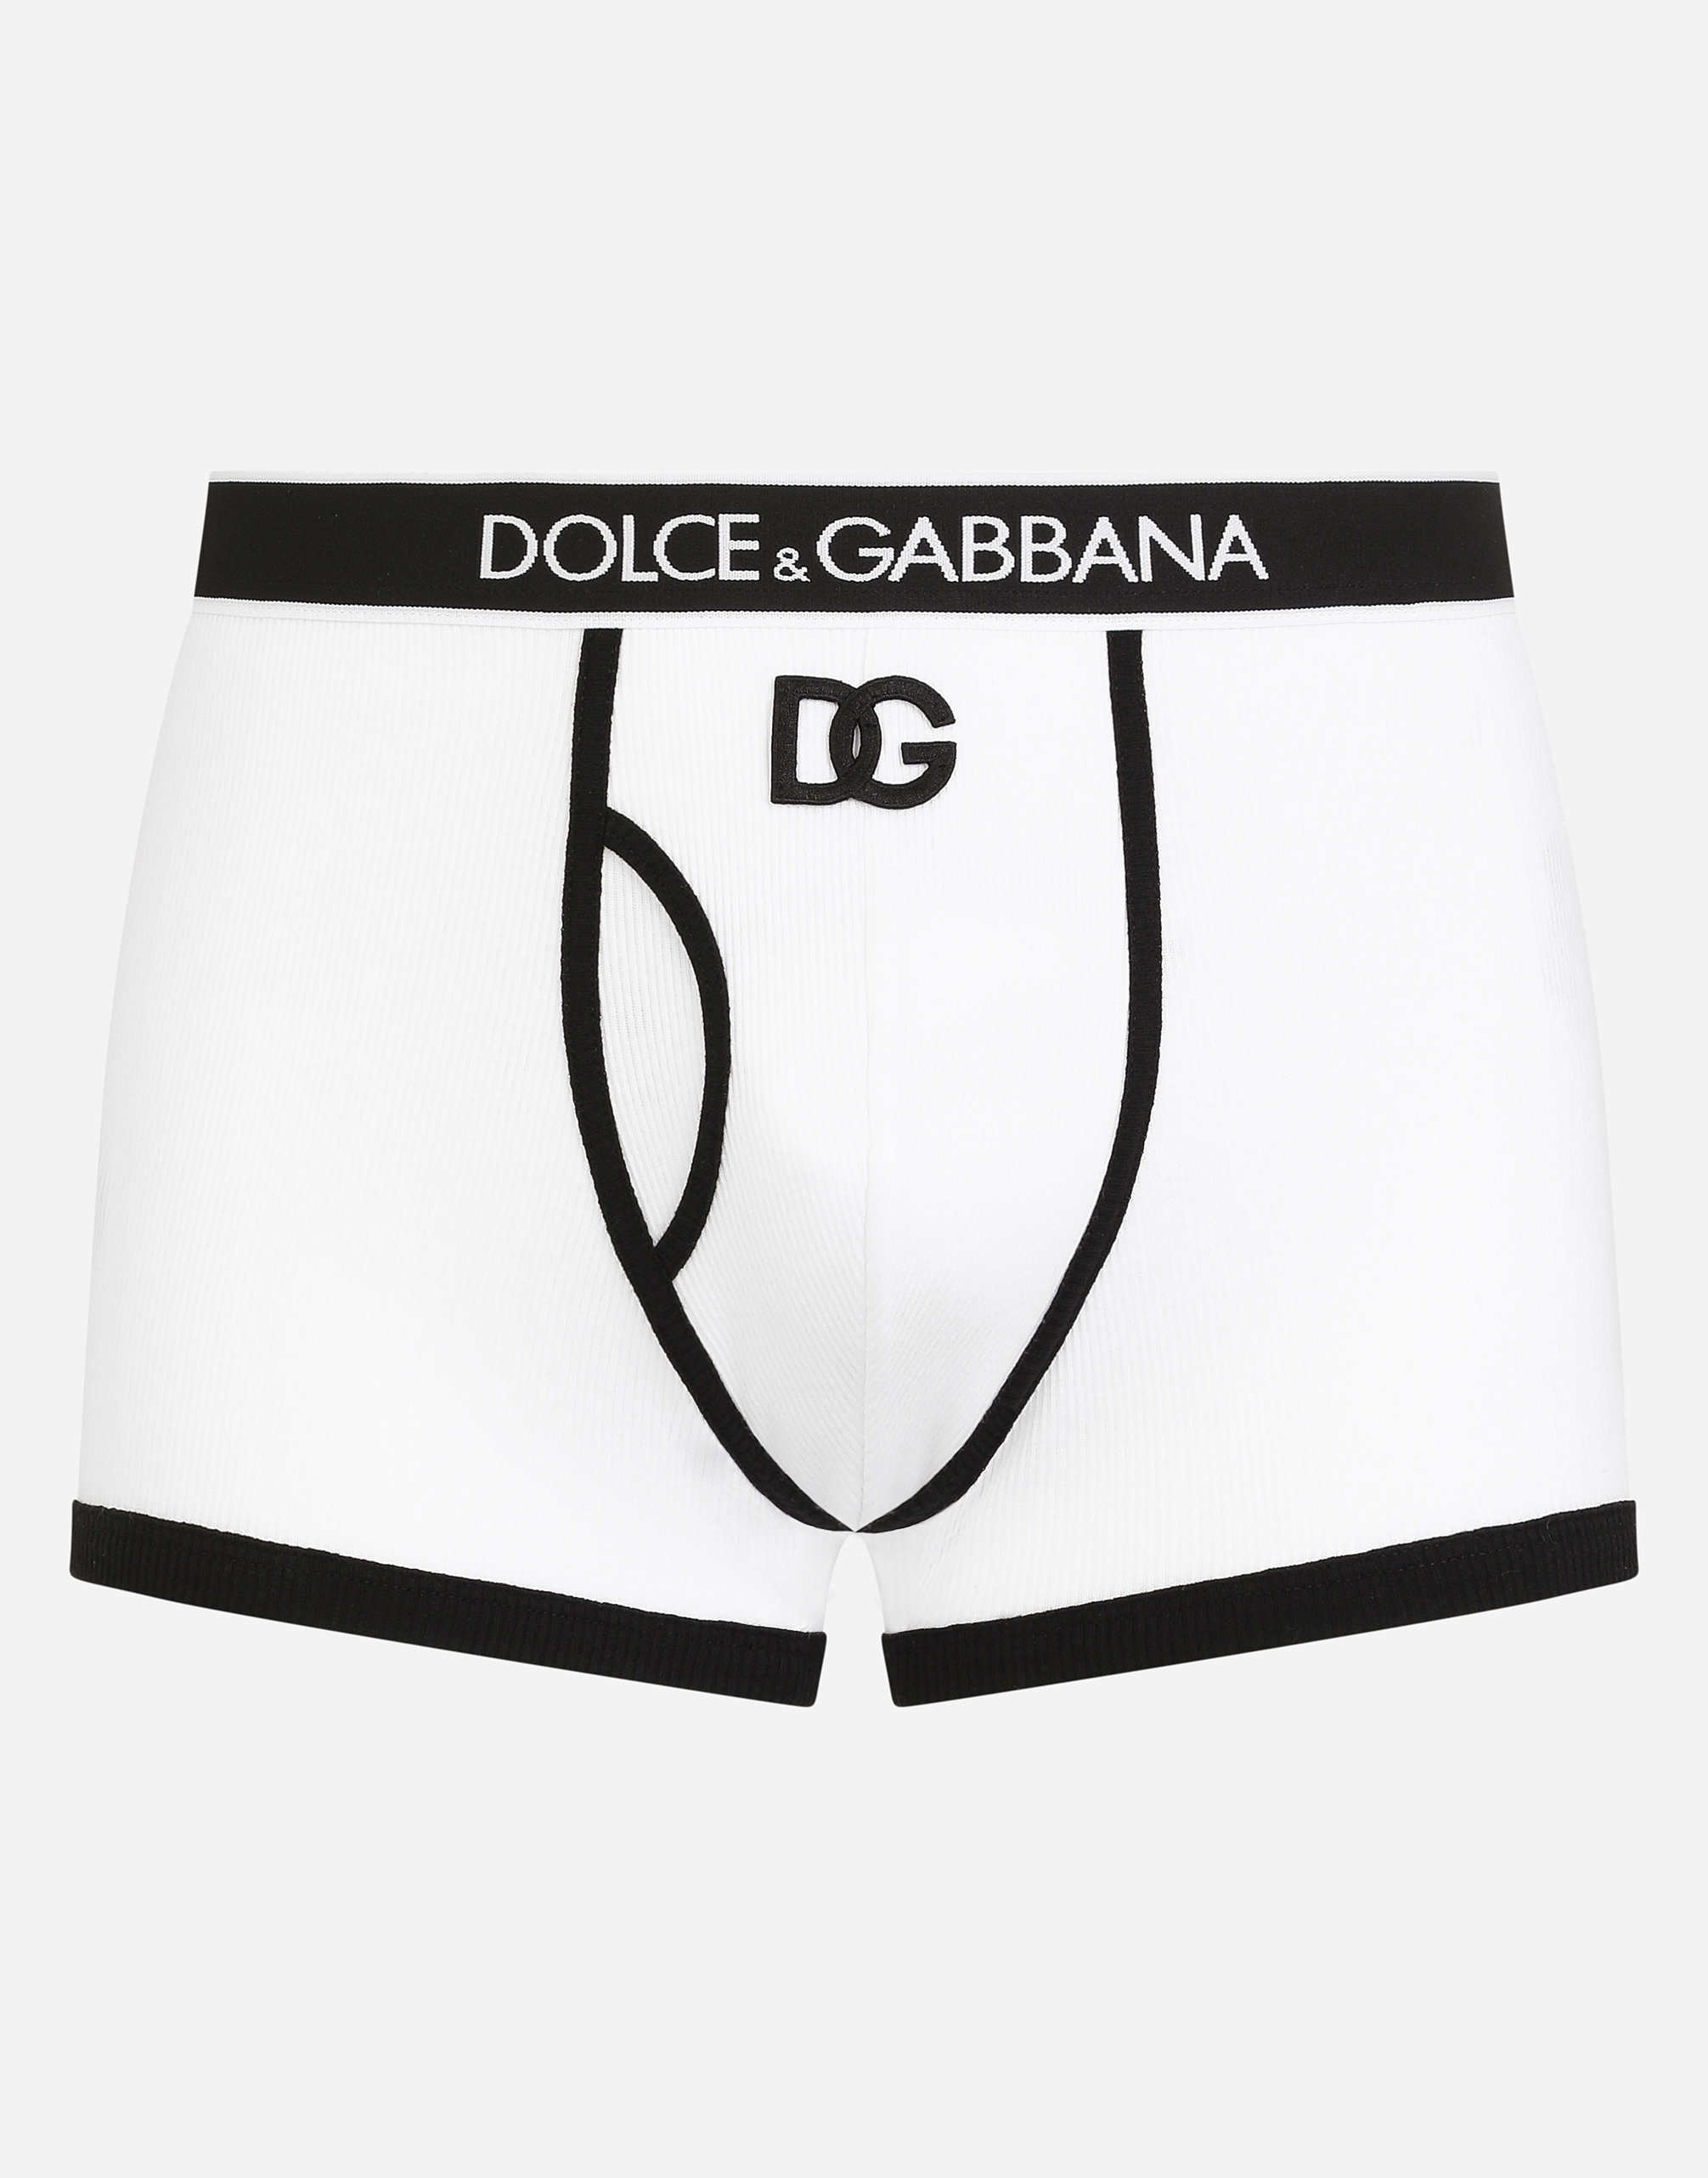 DOLCE & GABBANA FINE-RIB COTTON BOXERS WITH DG PATCH